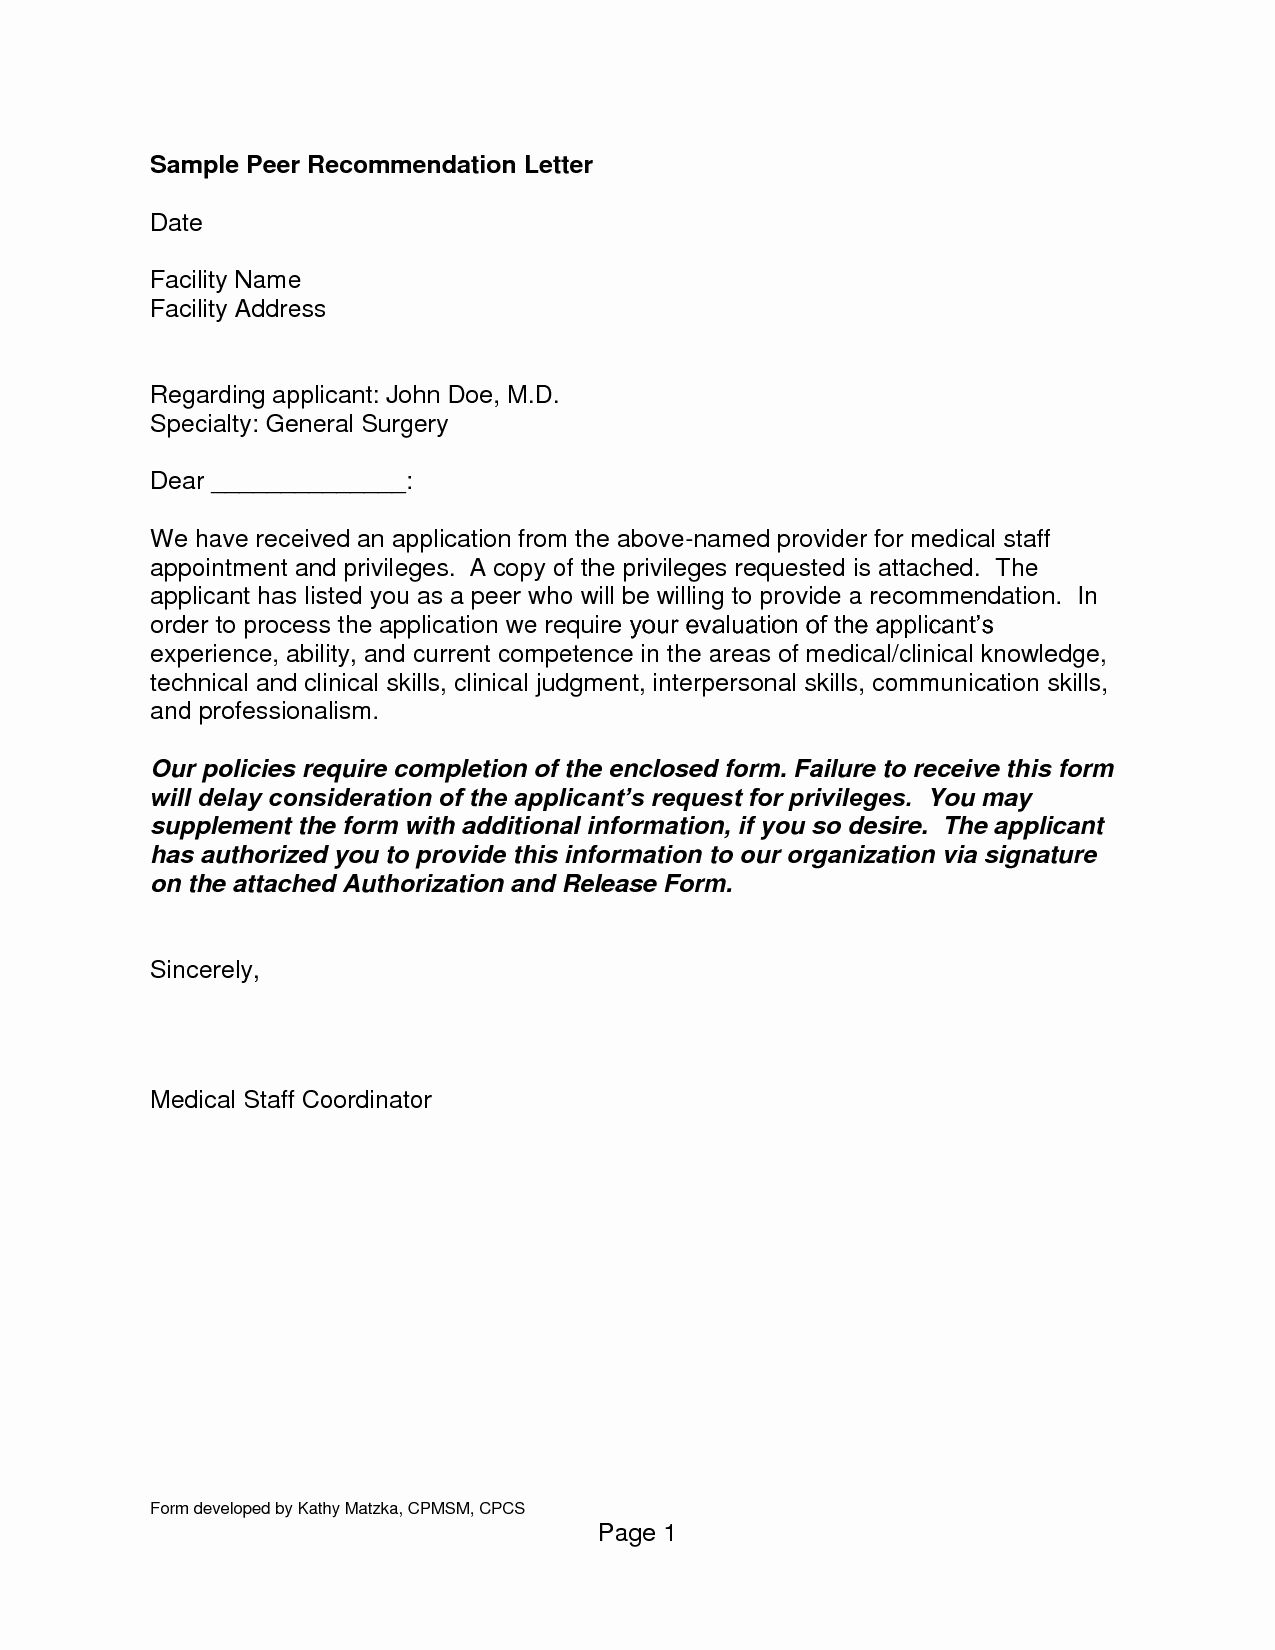 Letters Of Recommendation Template Lovely Reference Letter Template Letter Of Re Mendation format